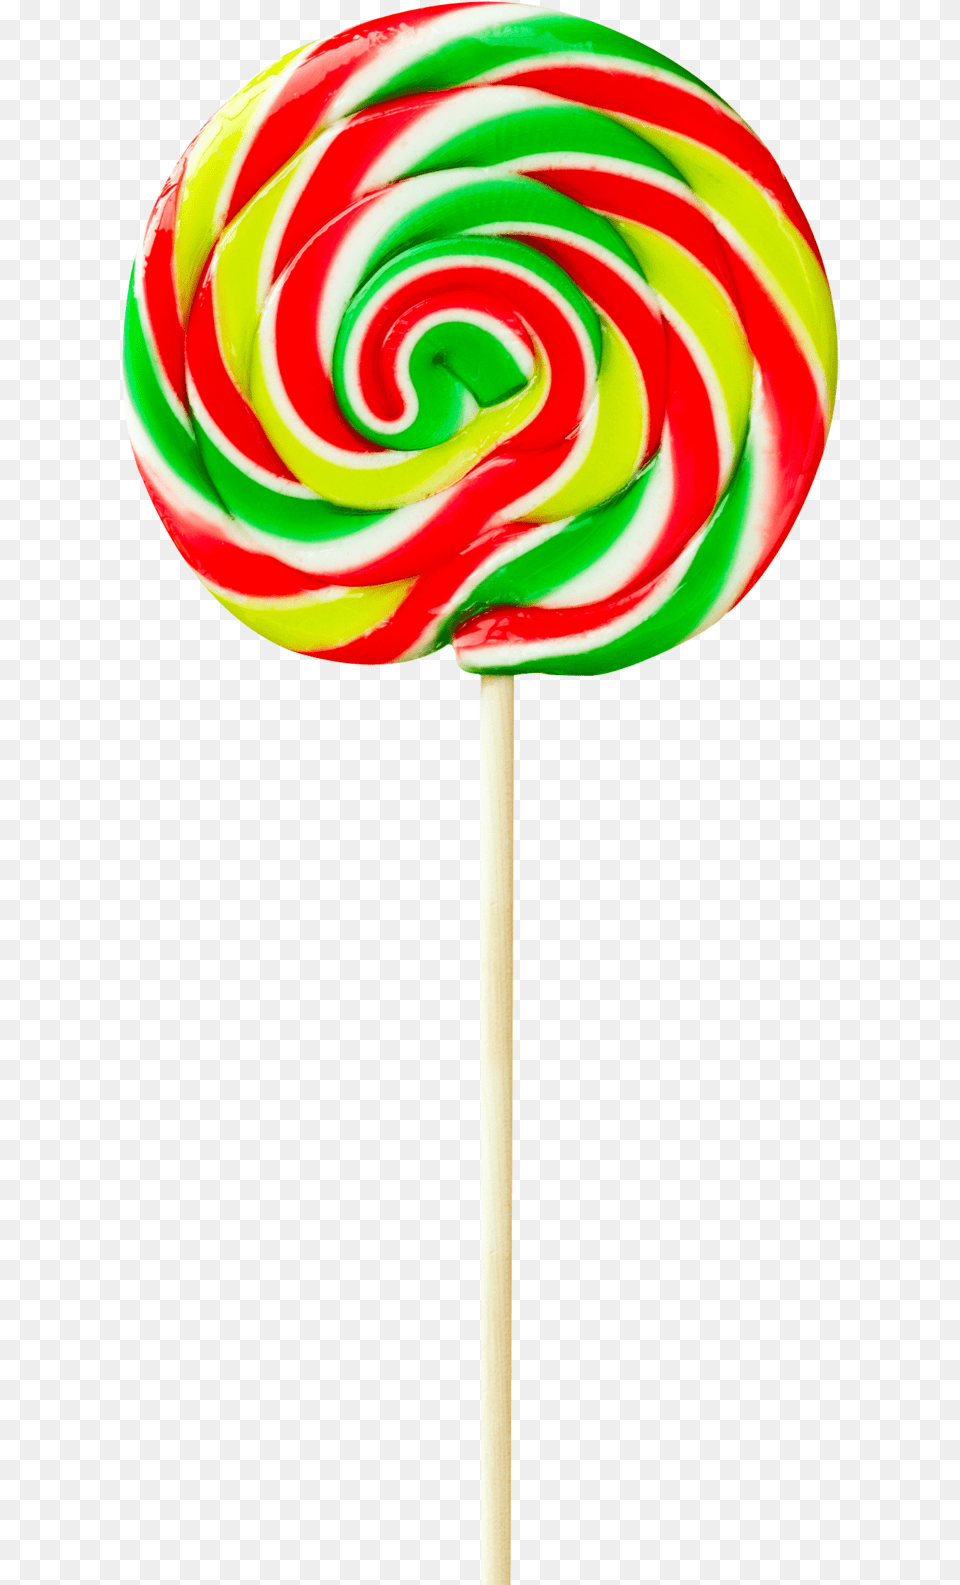 Free Images Toppng Transparent Lollipop, Candy, Food, Sweets Png